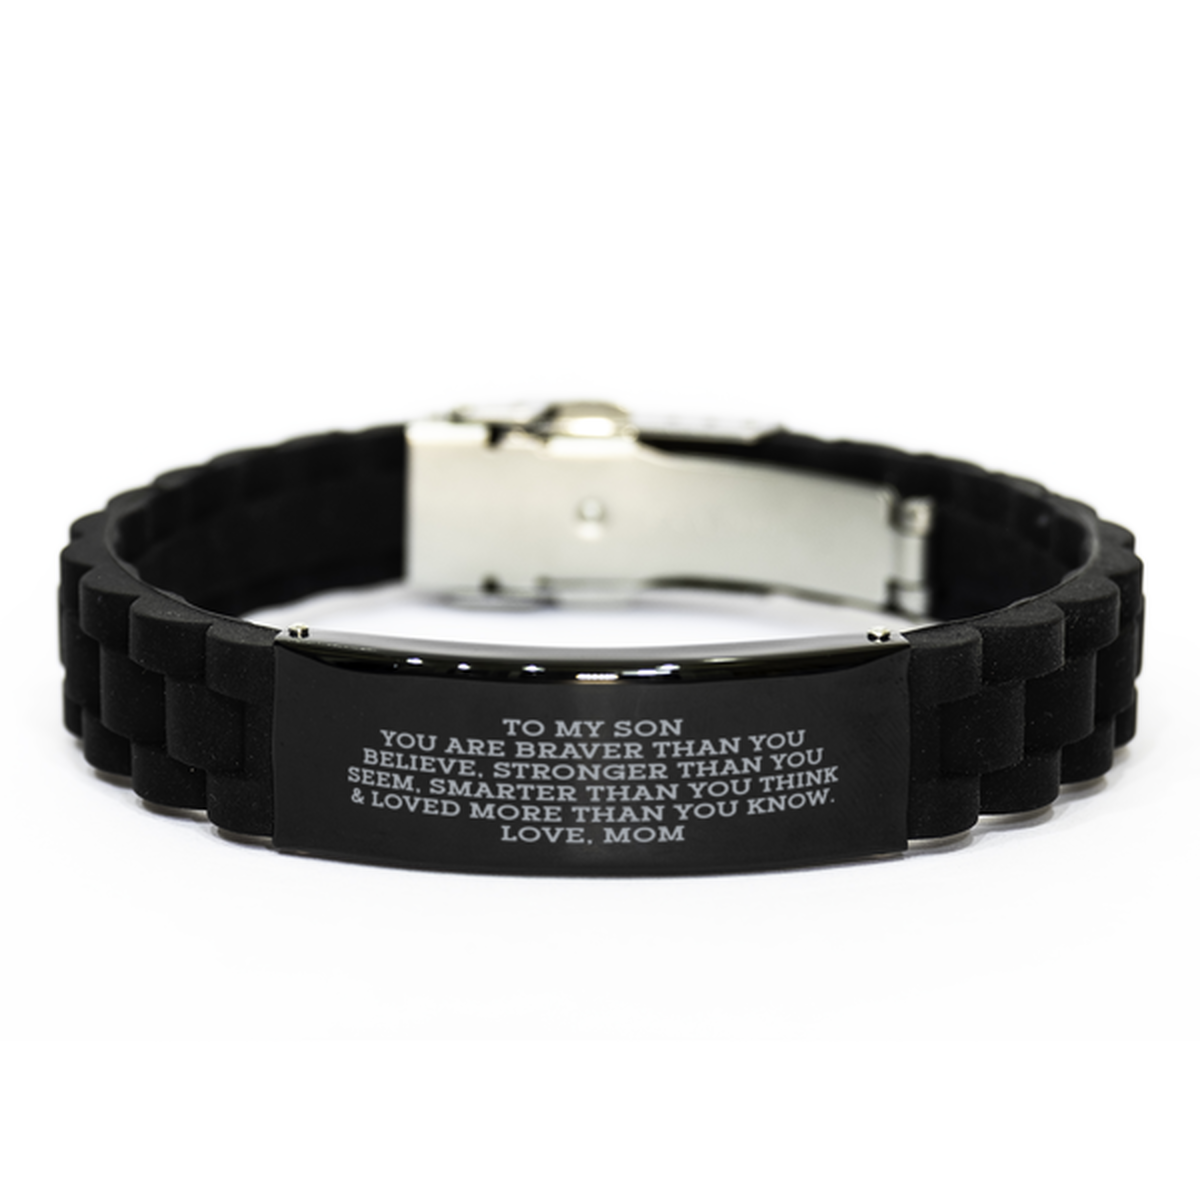 To My Son Black Bracelet, You Are Braver Than You Believe, Graduation Day Gifts For Son From Mom, Birthday Gifts For Men